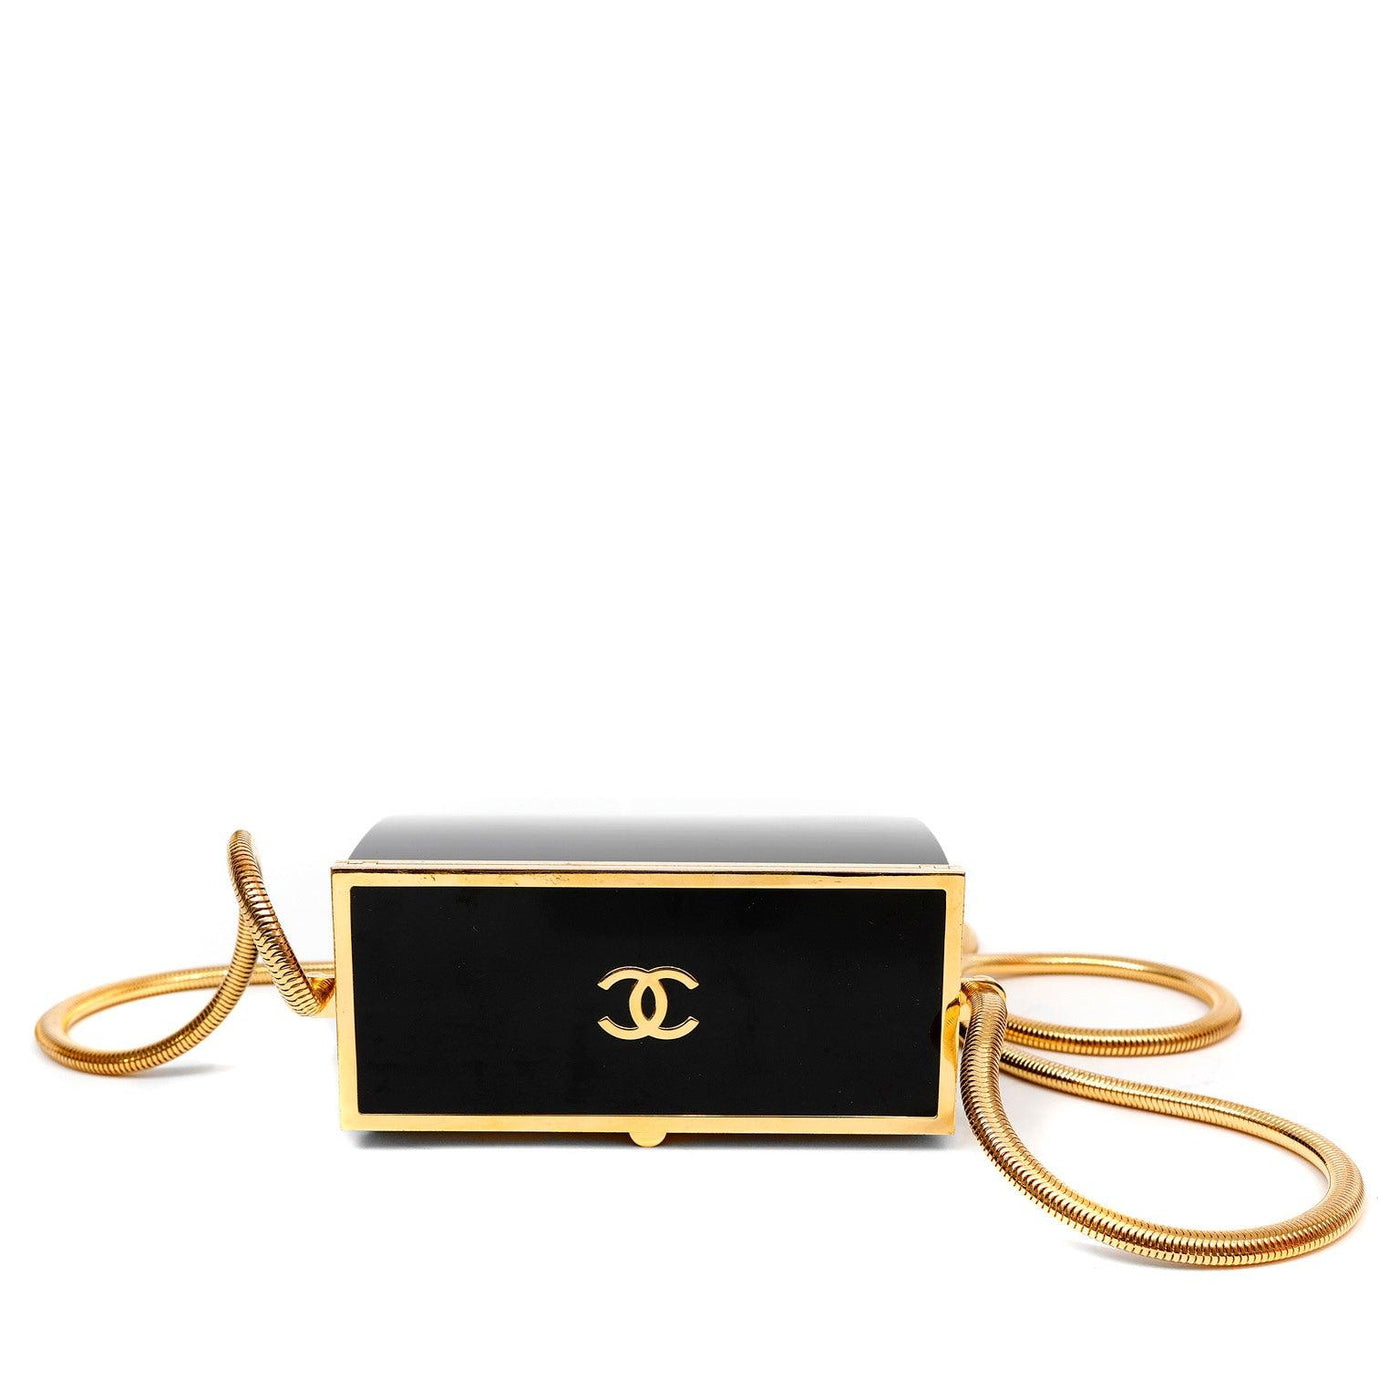 Chanel Black Resin Box Evening Bag - Only Authentics